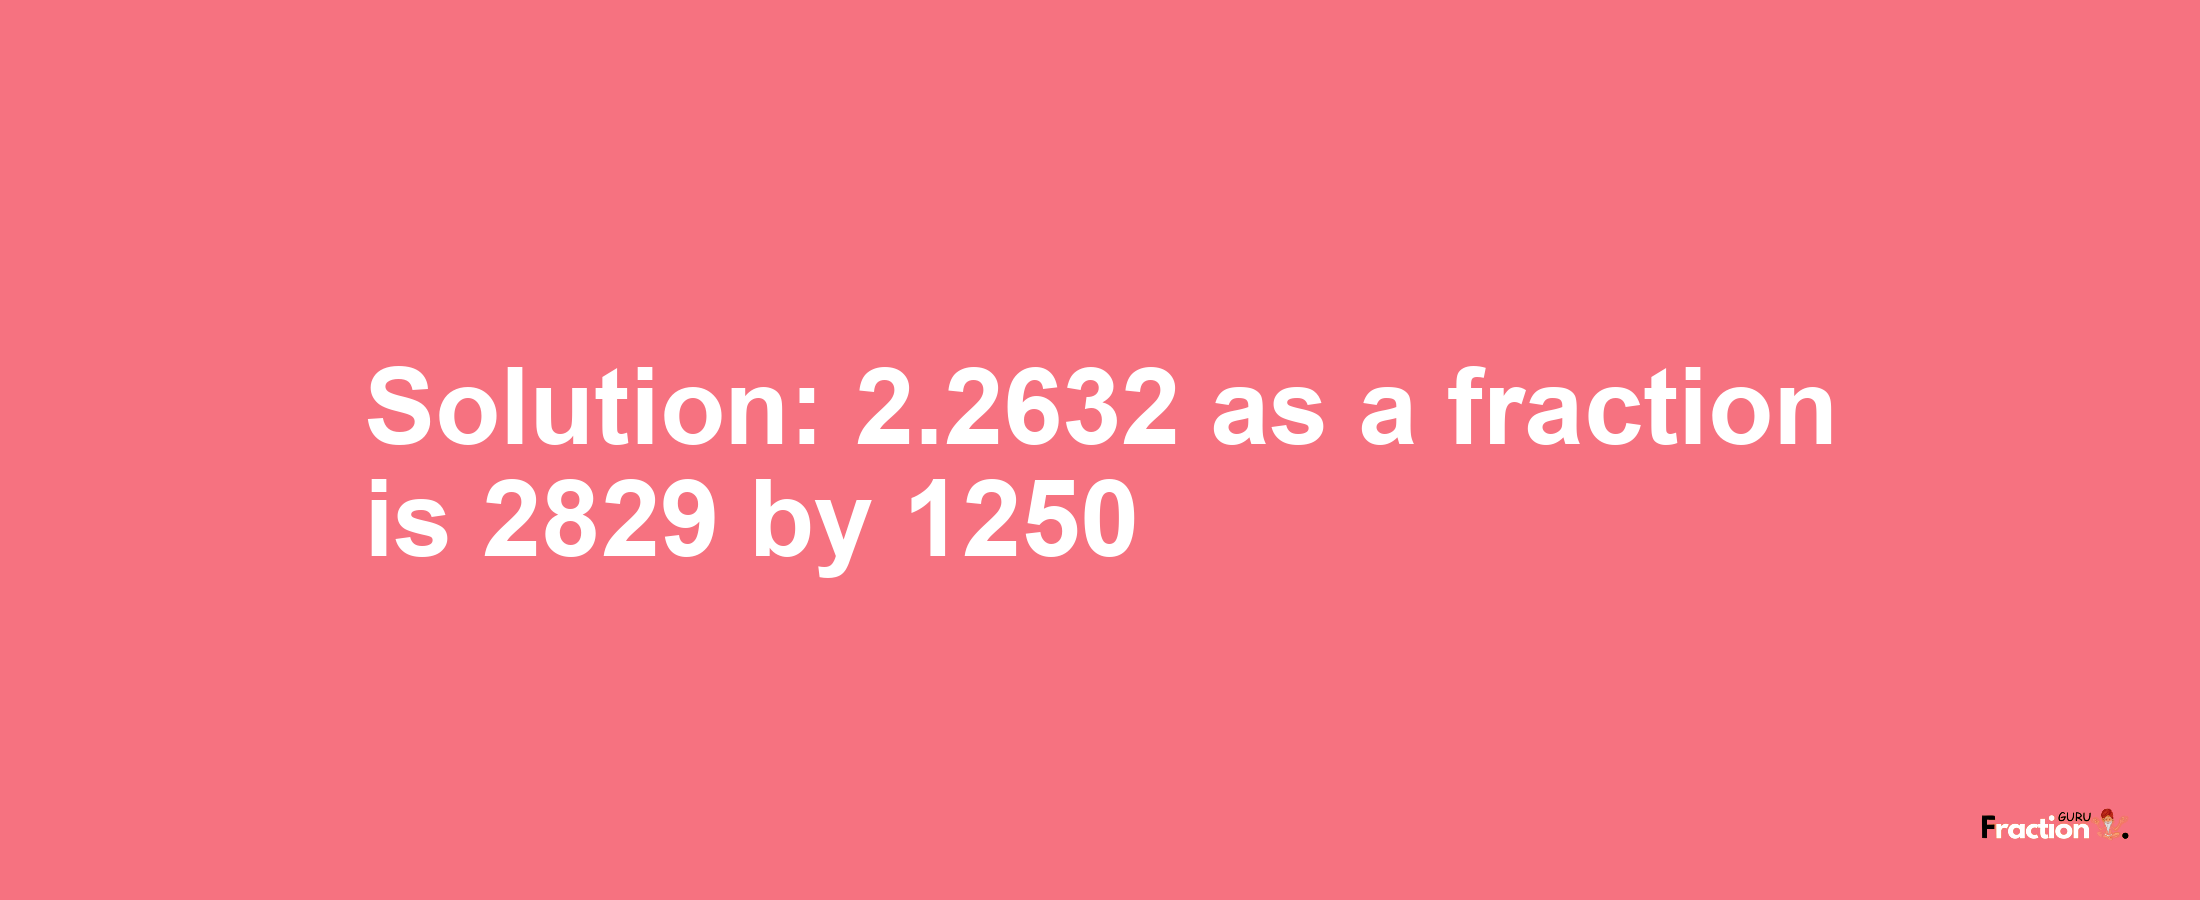 Solution:2.2632 as a fraction is 2829/1250